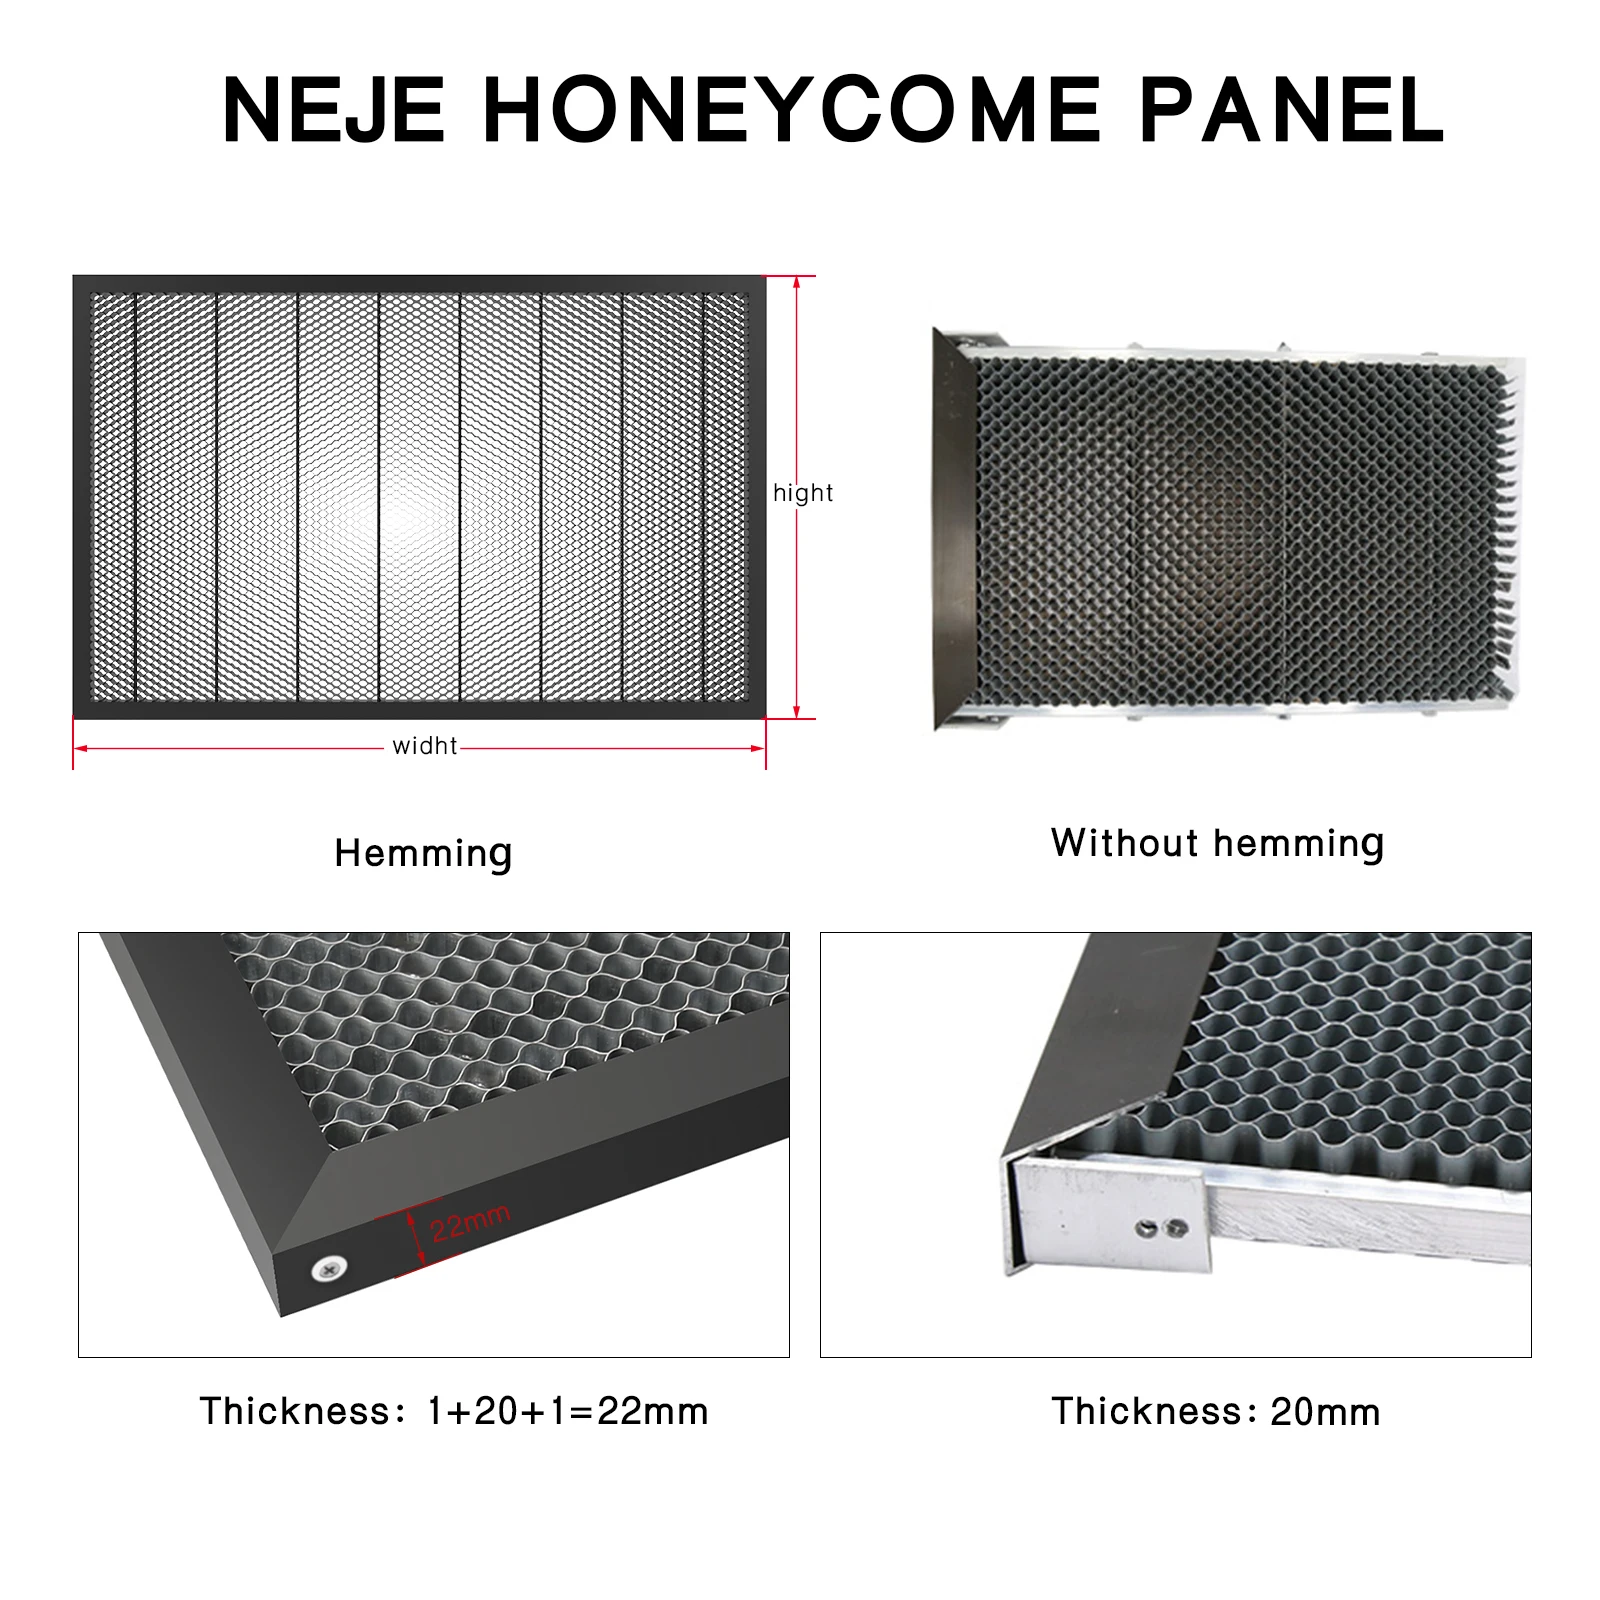 NEJE H8554 Honeycomb Panels 540 X 850mm CNC Laser Cutting Engraving Working Table For NEJE Master 2S MAX Bed ENGRAVER & CUTTER enlarge